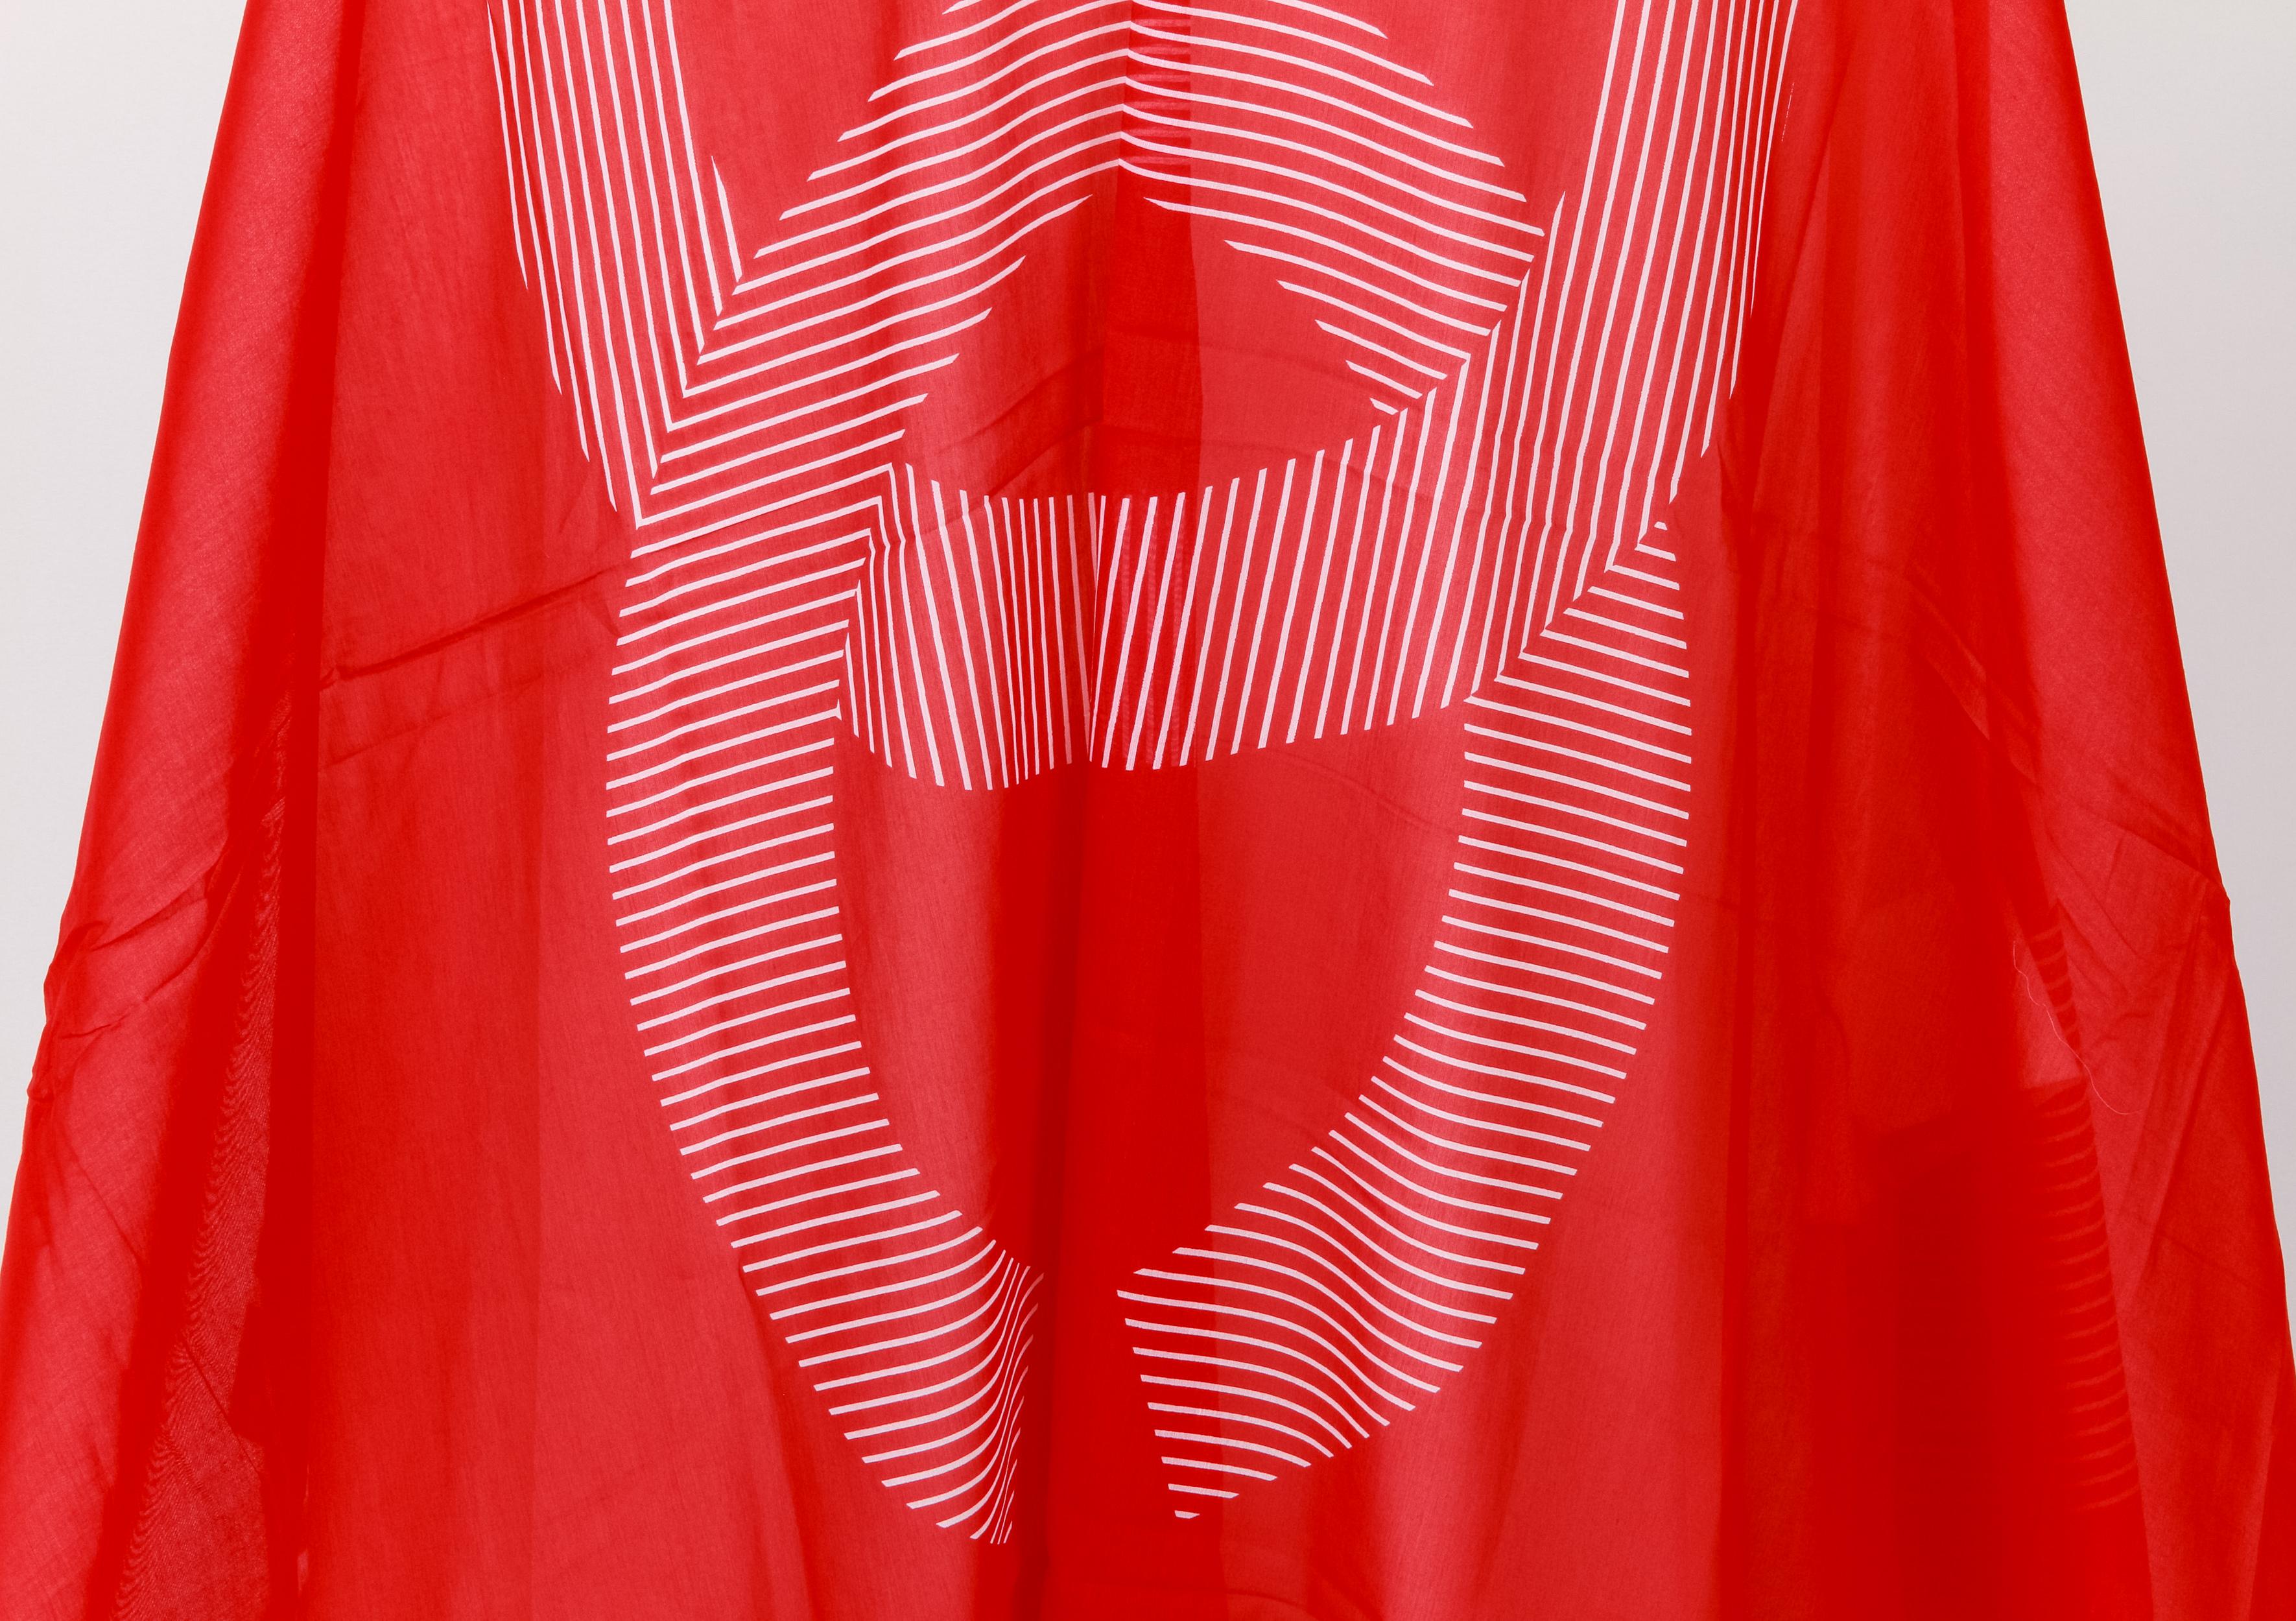 Chanel new red and white striped design shawl/sarong  
80% cotton, 20% silk, 
78